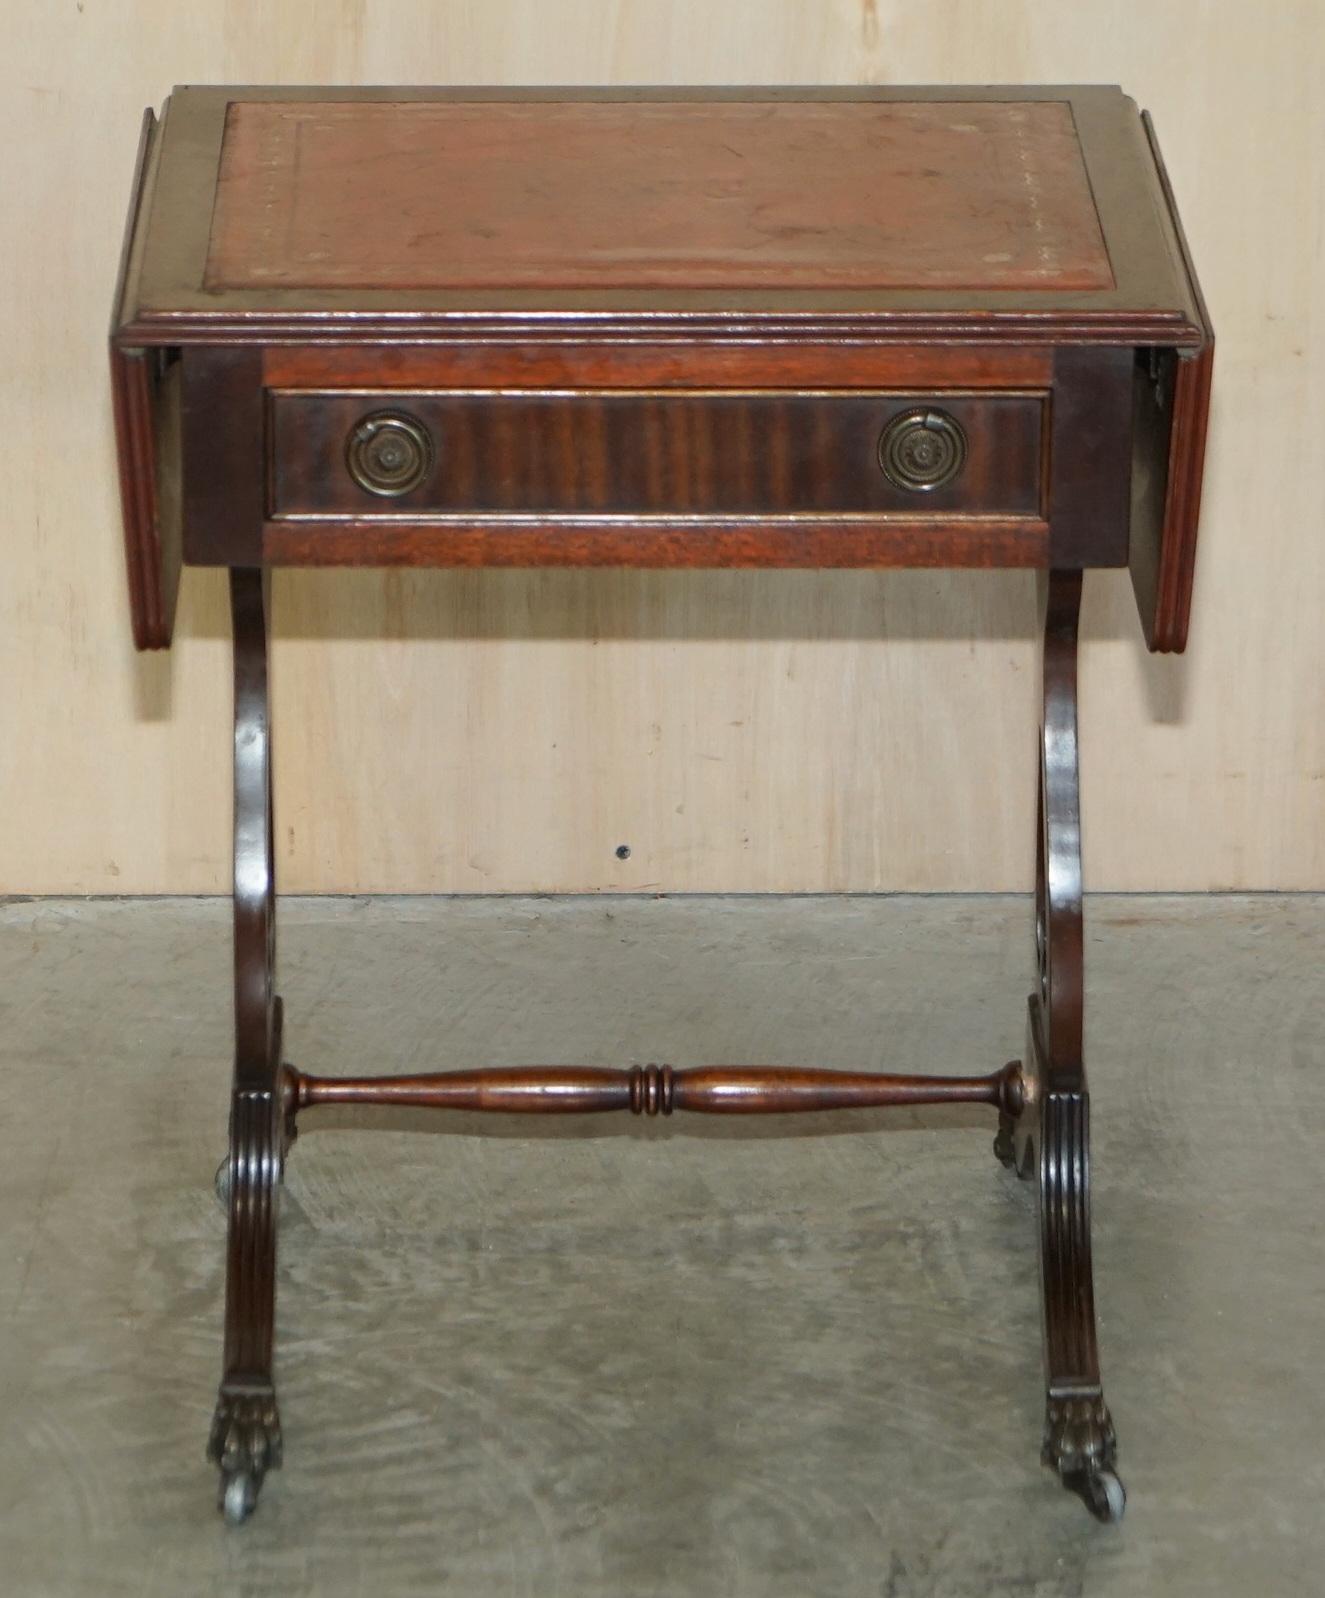 We are delighted to offer for sale this lovely Bevan Funnell vintage Mahogany side table with extending oxblood leather top and single drawer.

A very good looking and versatile piece, the top extends to a healthily 72.5cm wide which is large for